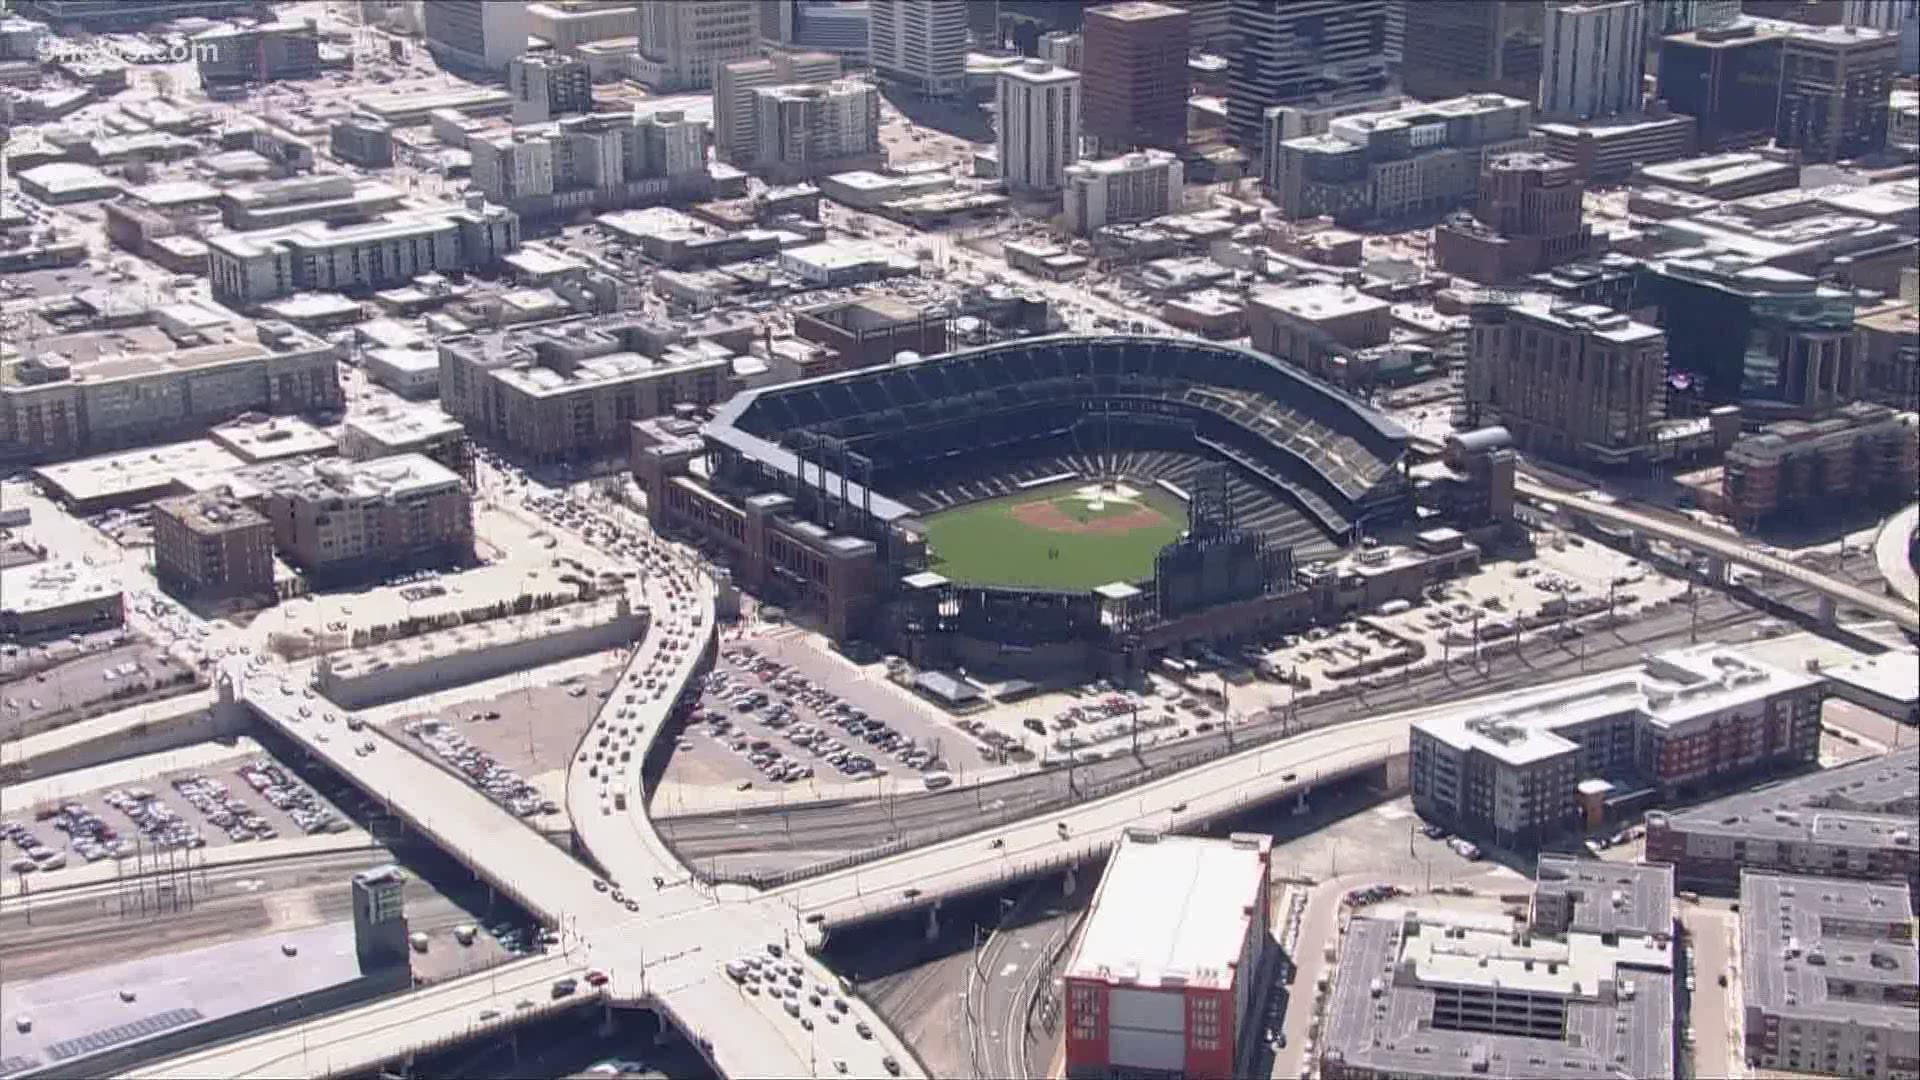 After pulling the 2021 All-Star Game from Atlanta, MLB is reportedly considering Coors Field to host the game, according to the Associated Press.